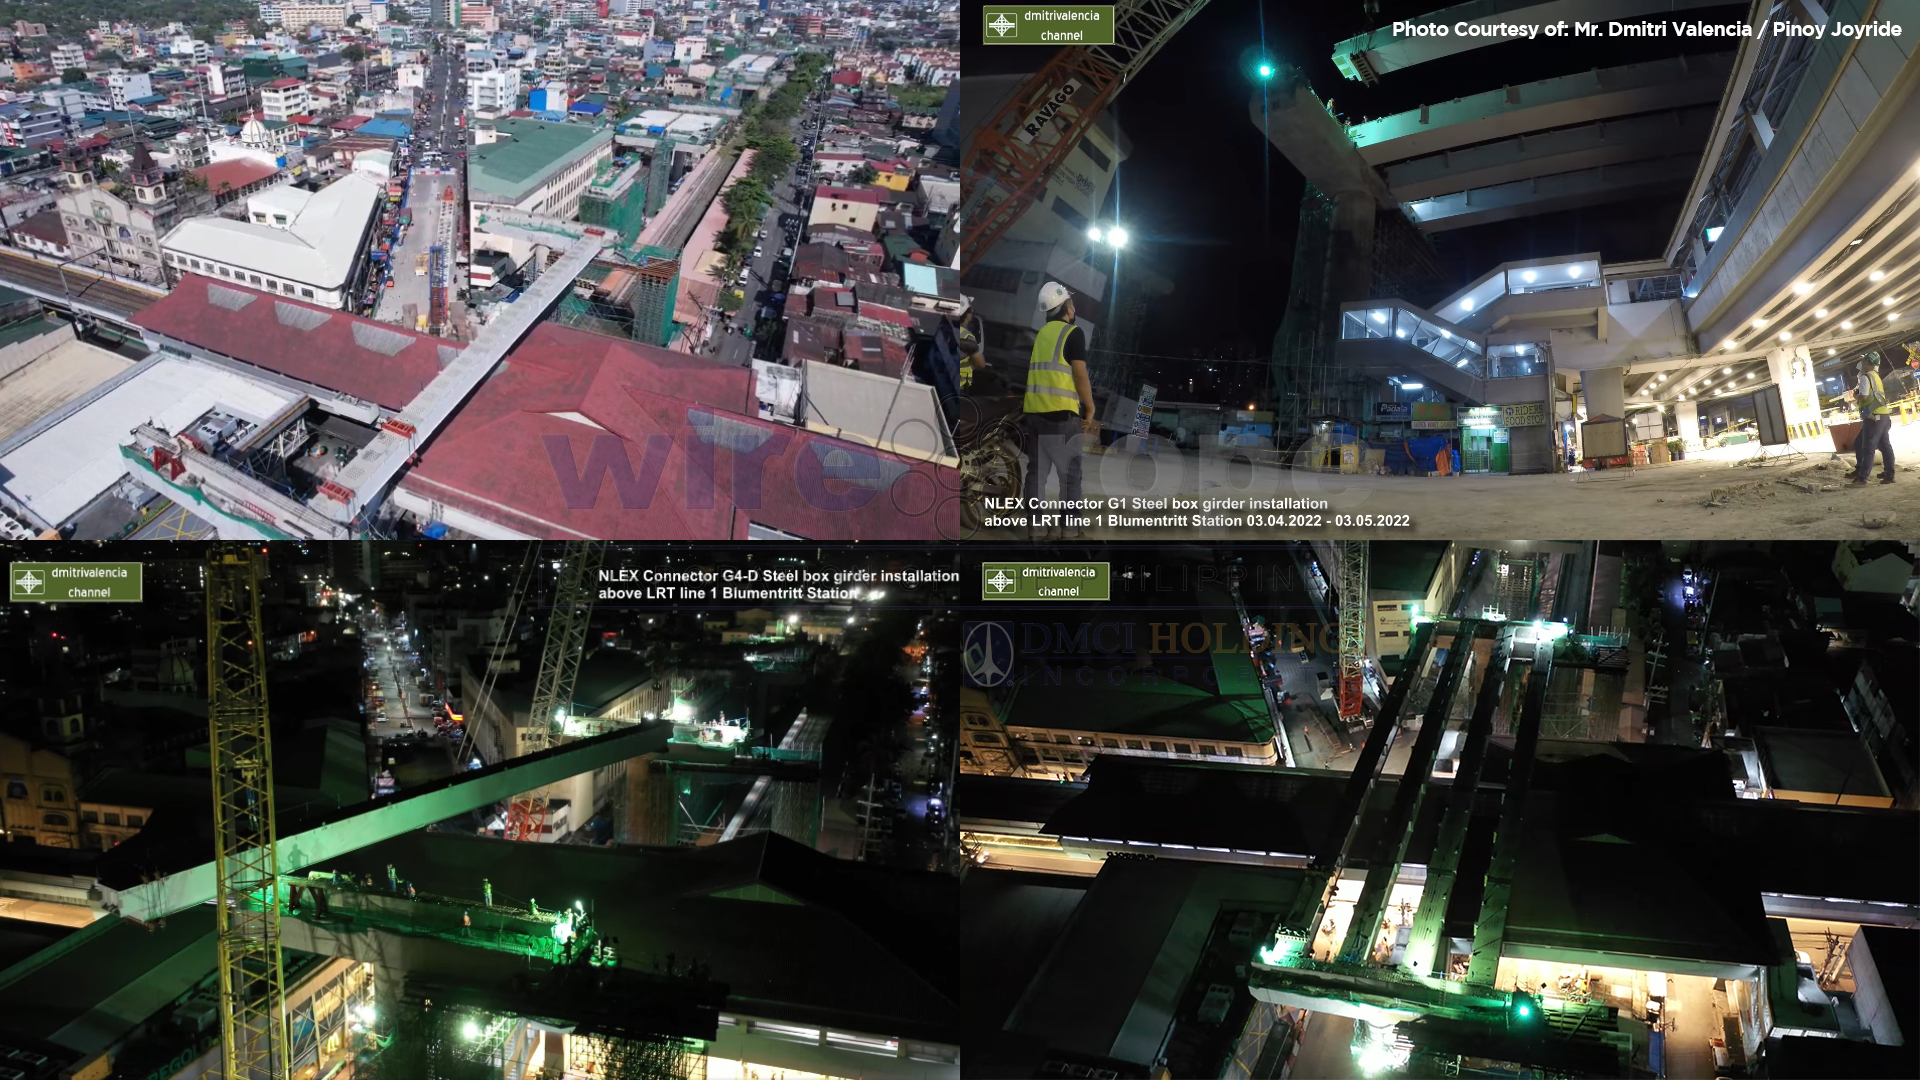 Composite View of Heavy Lift at Blumentritt Station